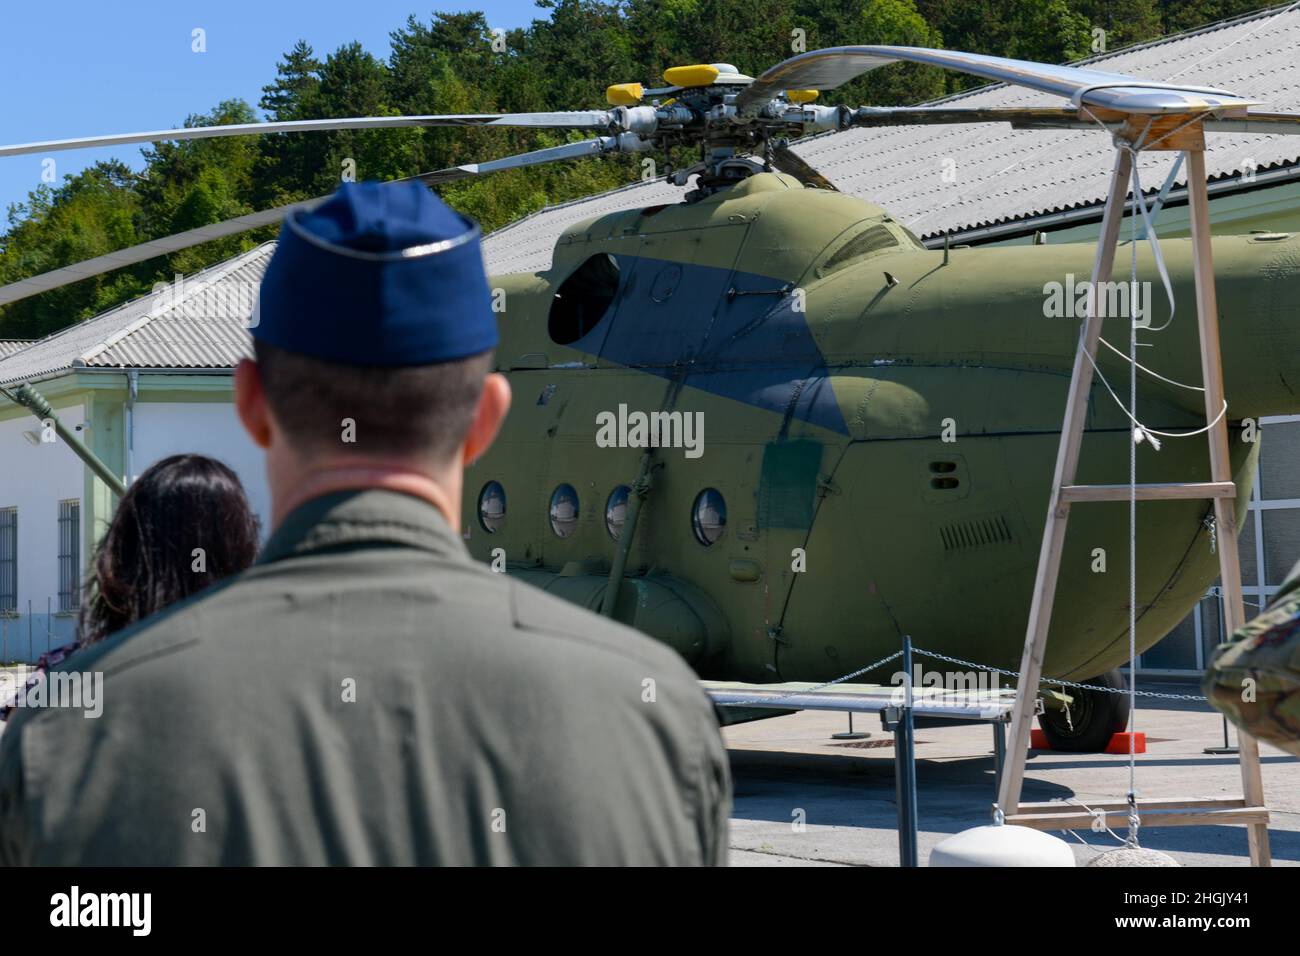 U.S. Air Force Lt. Col. Branden Felker, 31st Operational Support Squadron director of operations, looks at a helicopter at the Pivka Park of Military History in Pivka, Slovenia, Aug. 25, 2021. The museum is operated by the town of Pivka and the Slovenian Armed Forces and the exhibits illustrate history from World War II to the Cold War, the time frame of the former Socialist Federal Republic of Yugoslavia. Stock Photo